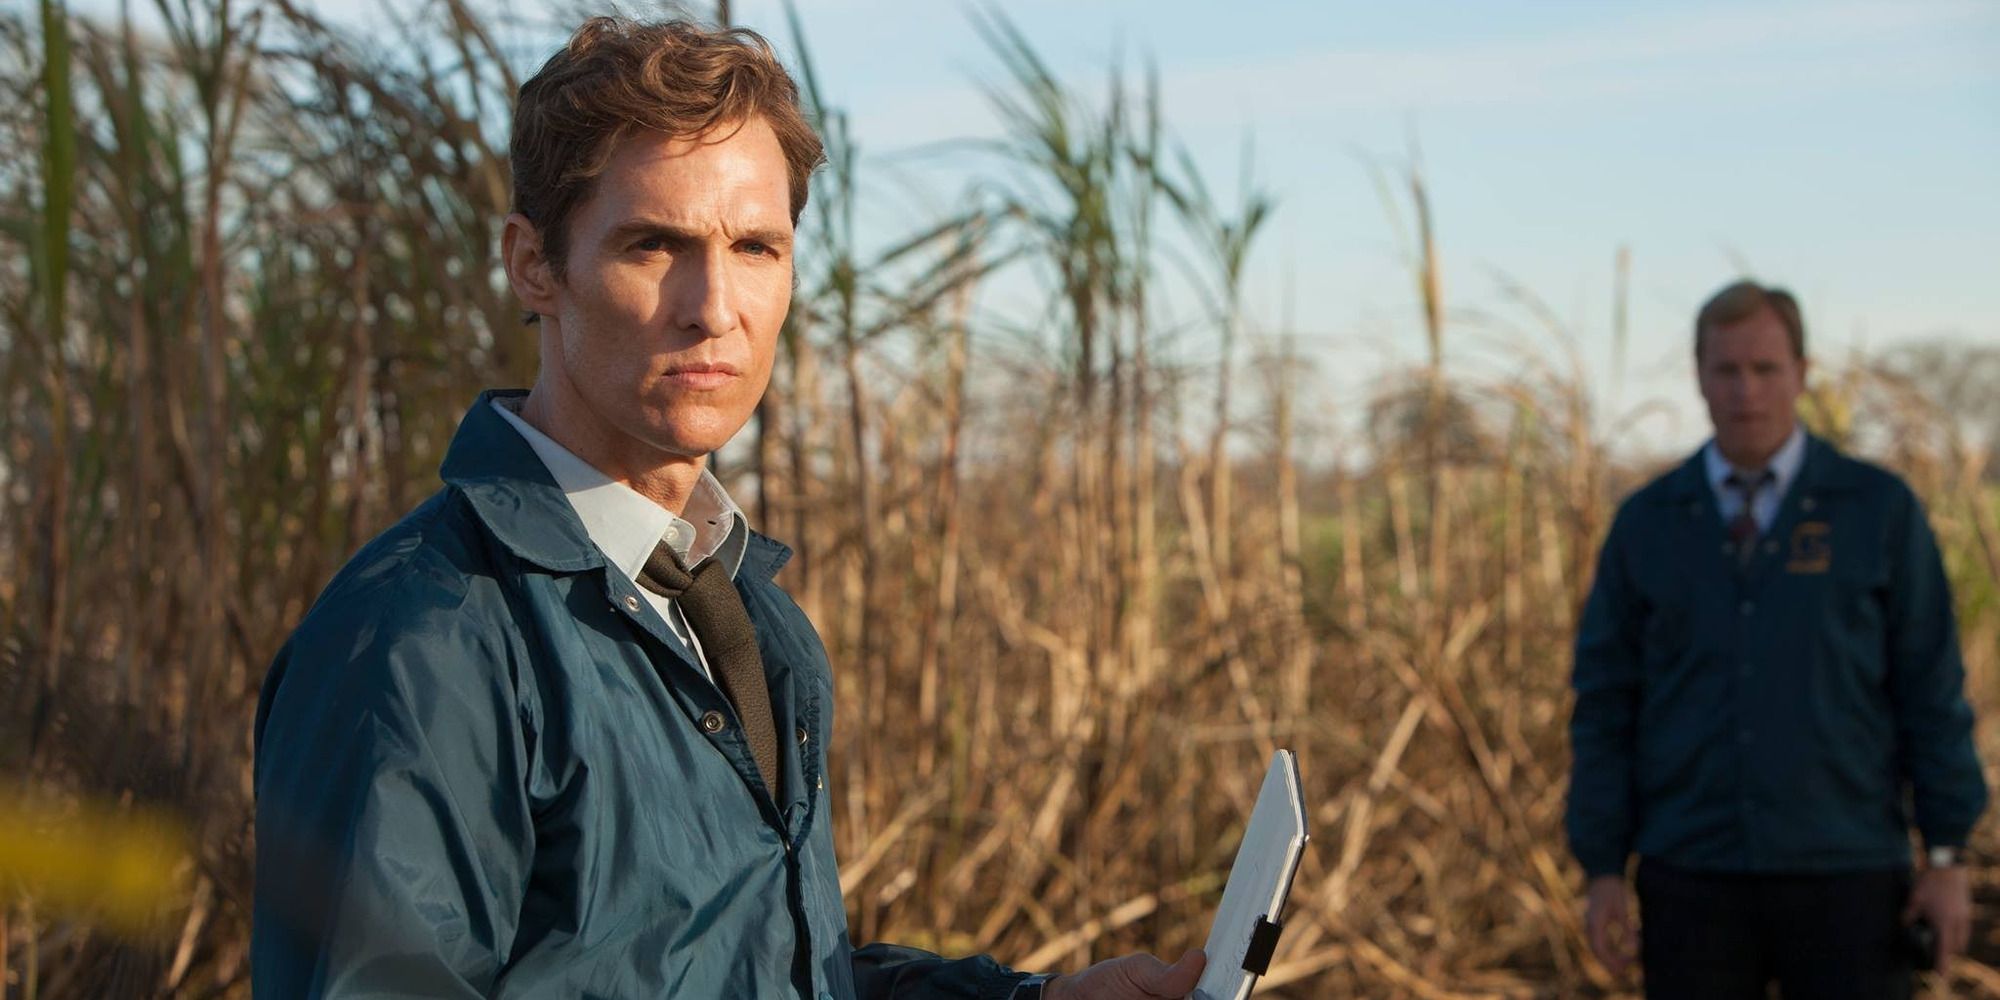 Rust Cohle (Matthew McConaughey) with a notepad in a cornfield near Marty Hart (Woody Harrelson) from True Detective: The Lone Bright Dark